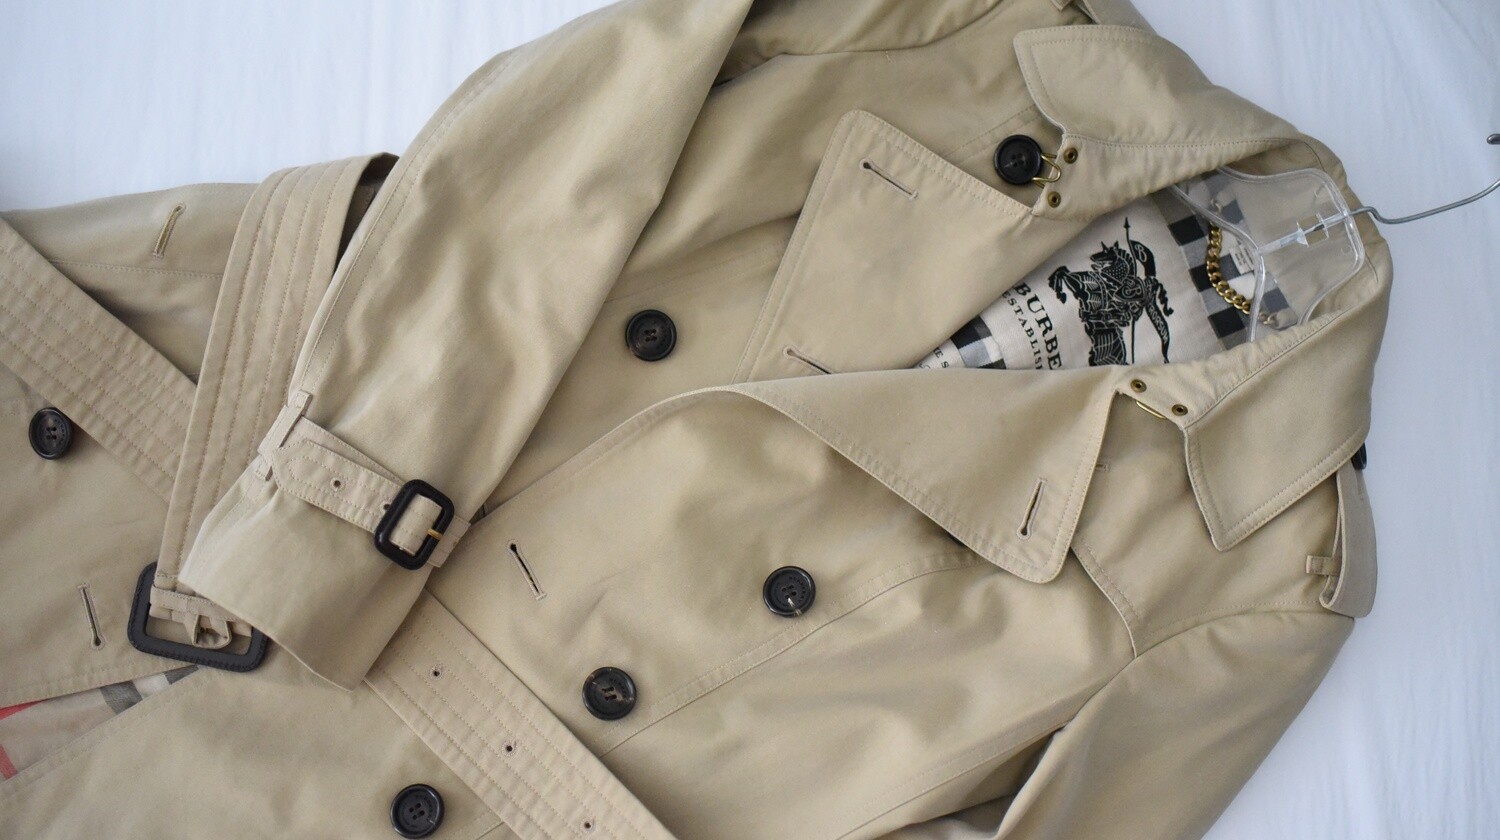 Burberry Trench Coat, Sandringham, Made in England, Size 2 US, Preowned  GA003 - Julia Rose Boston | Shop